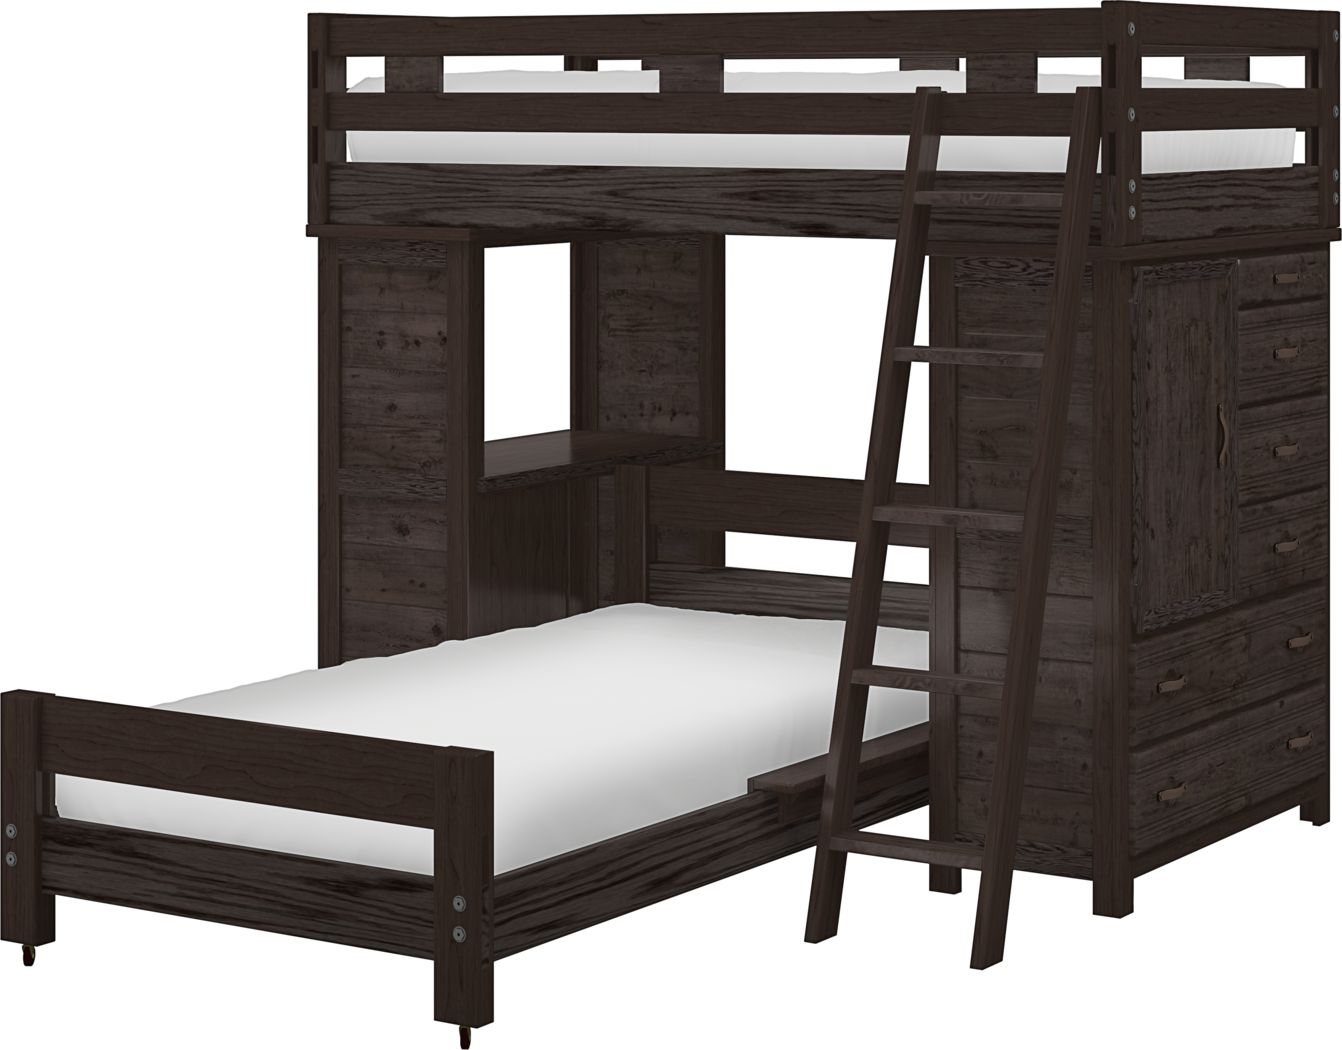 Creekside Furniture Collection Bunk, Creekside Bunk Bed Assembly Instructions